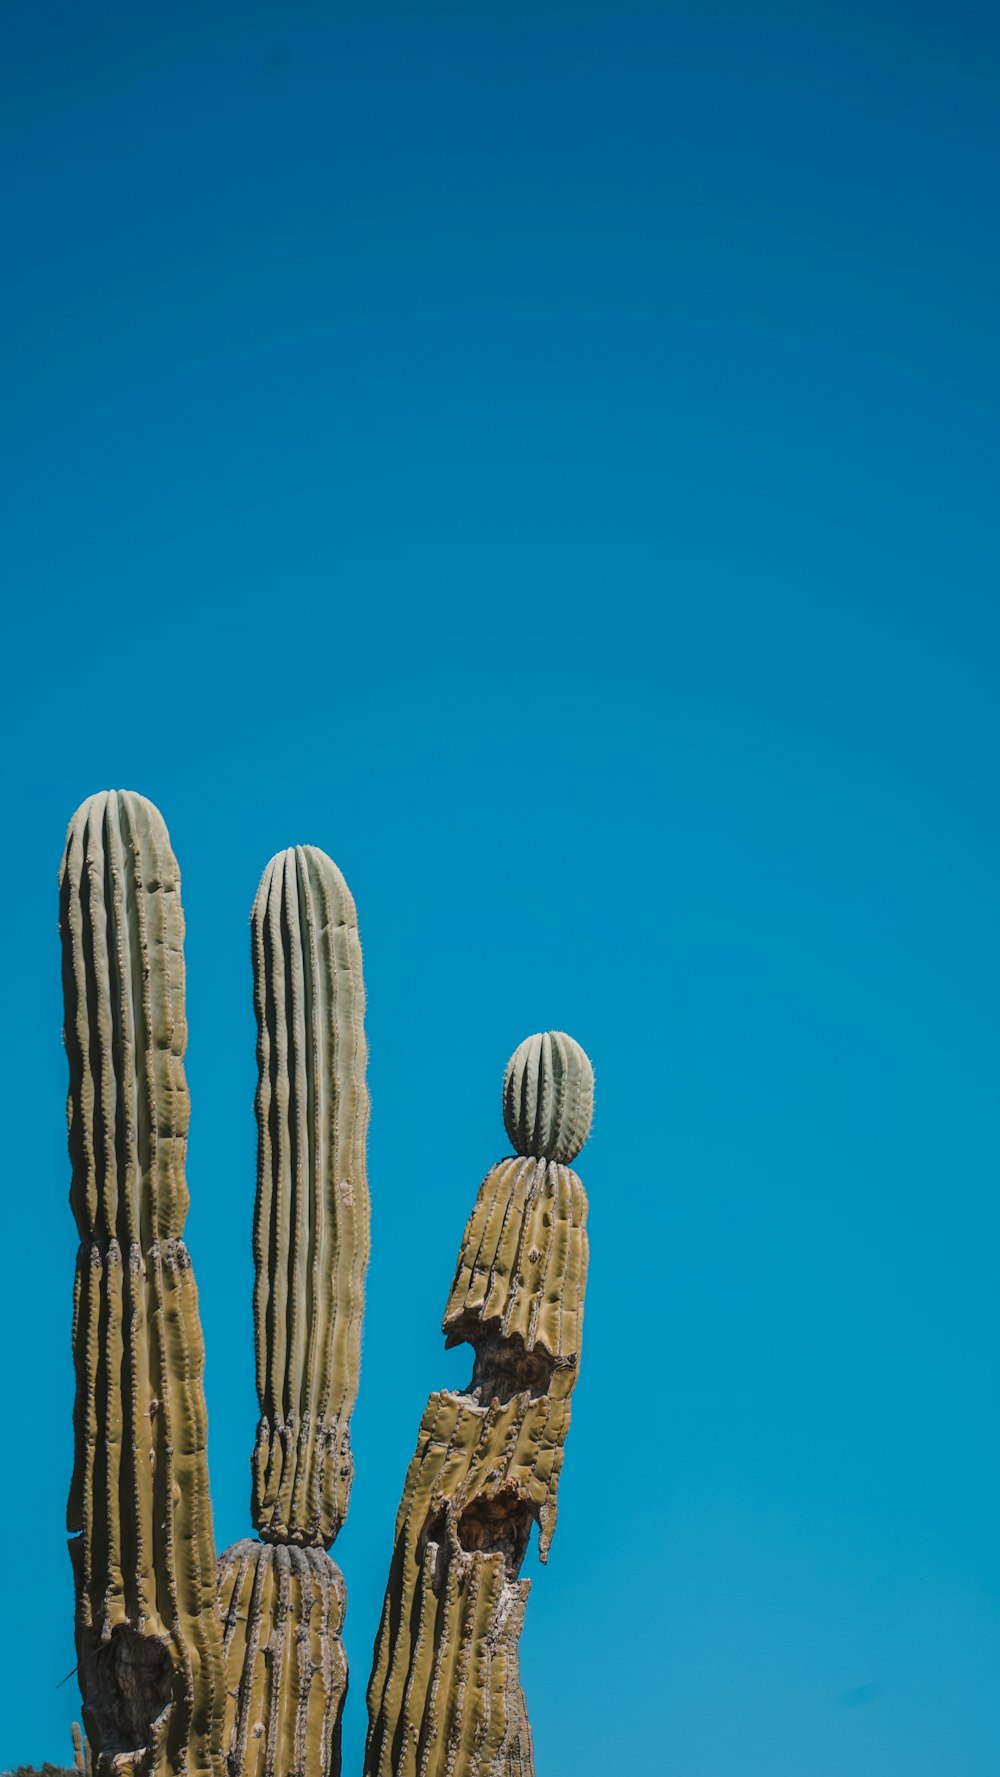 a large cactus in the shape of a hand